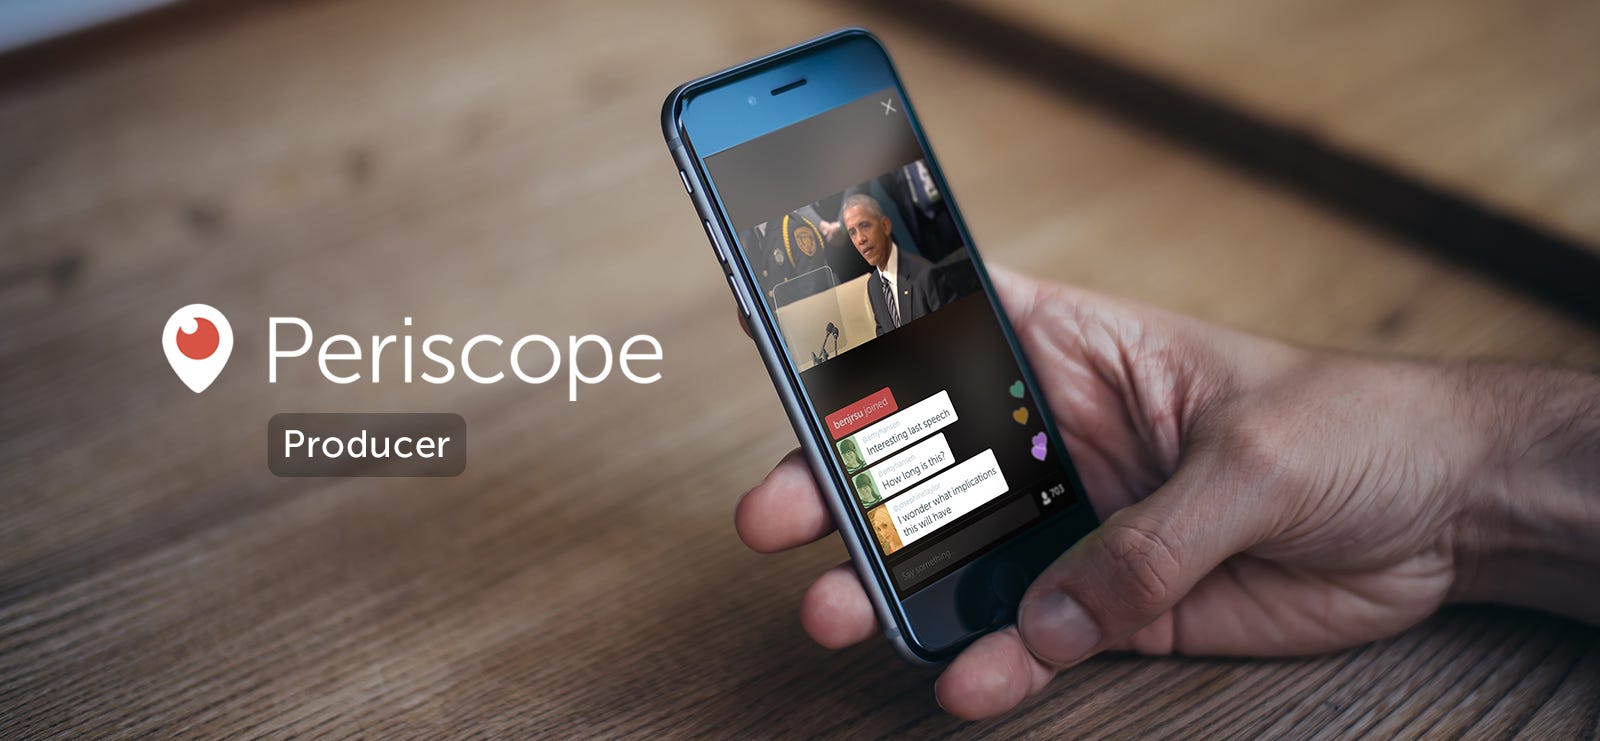 Periscope Producer, a new way to broadcast live video | by Periscope |  Medium